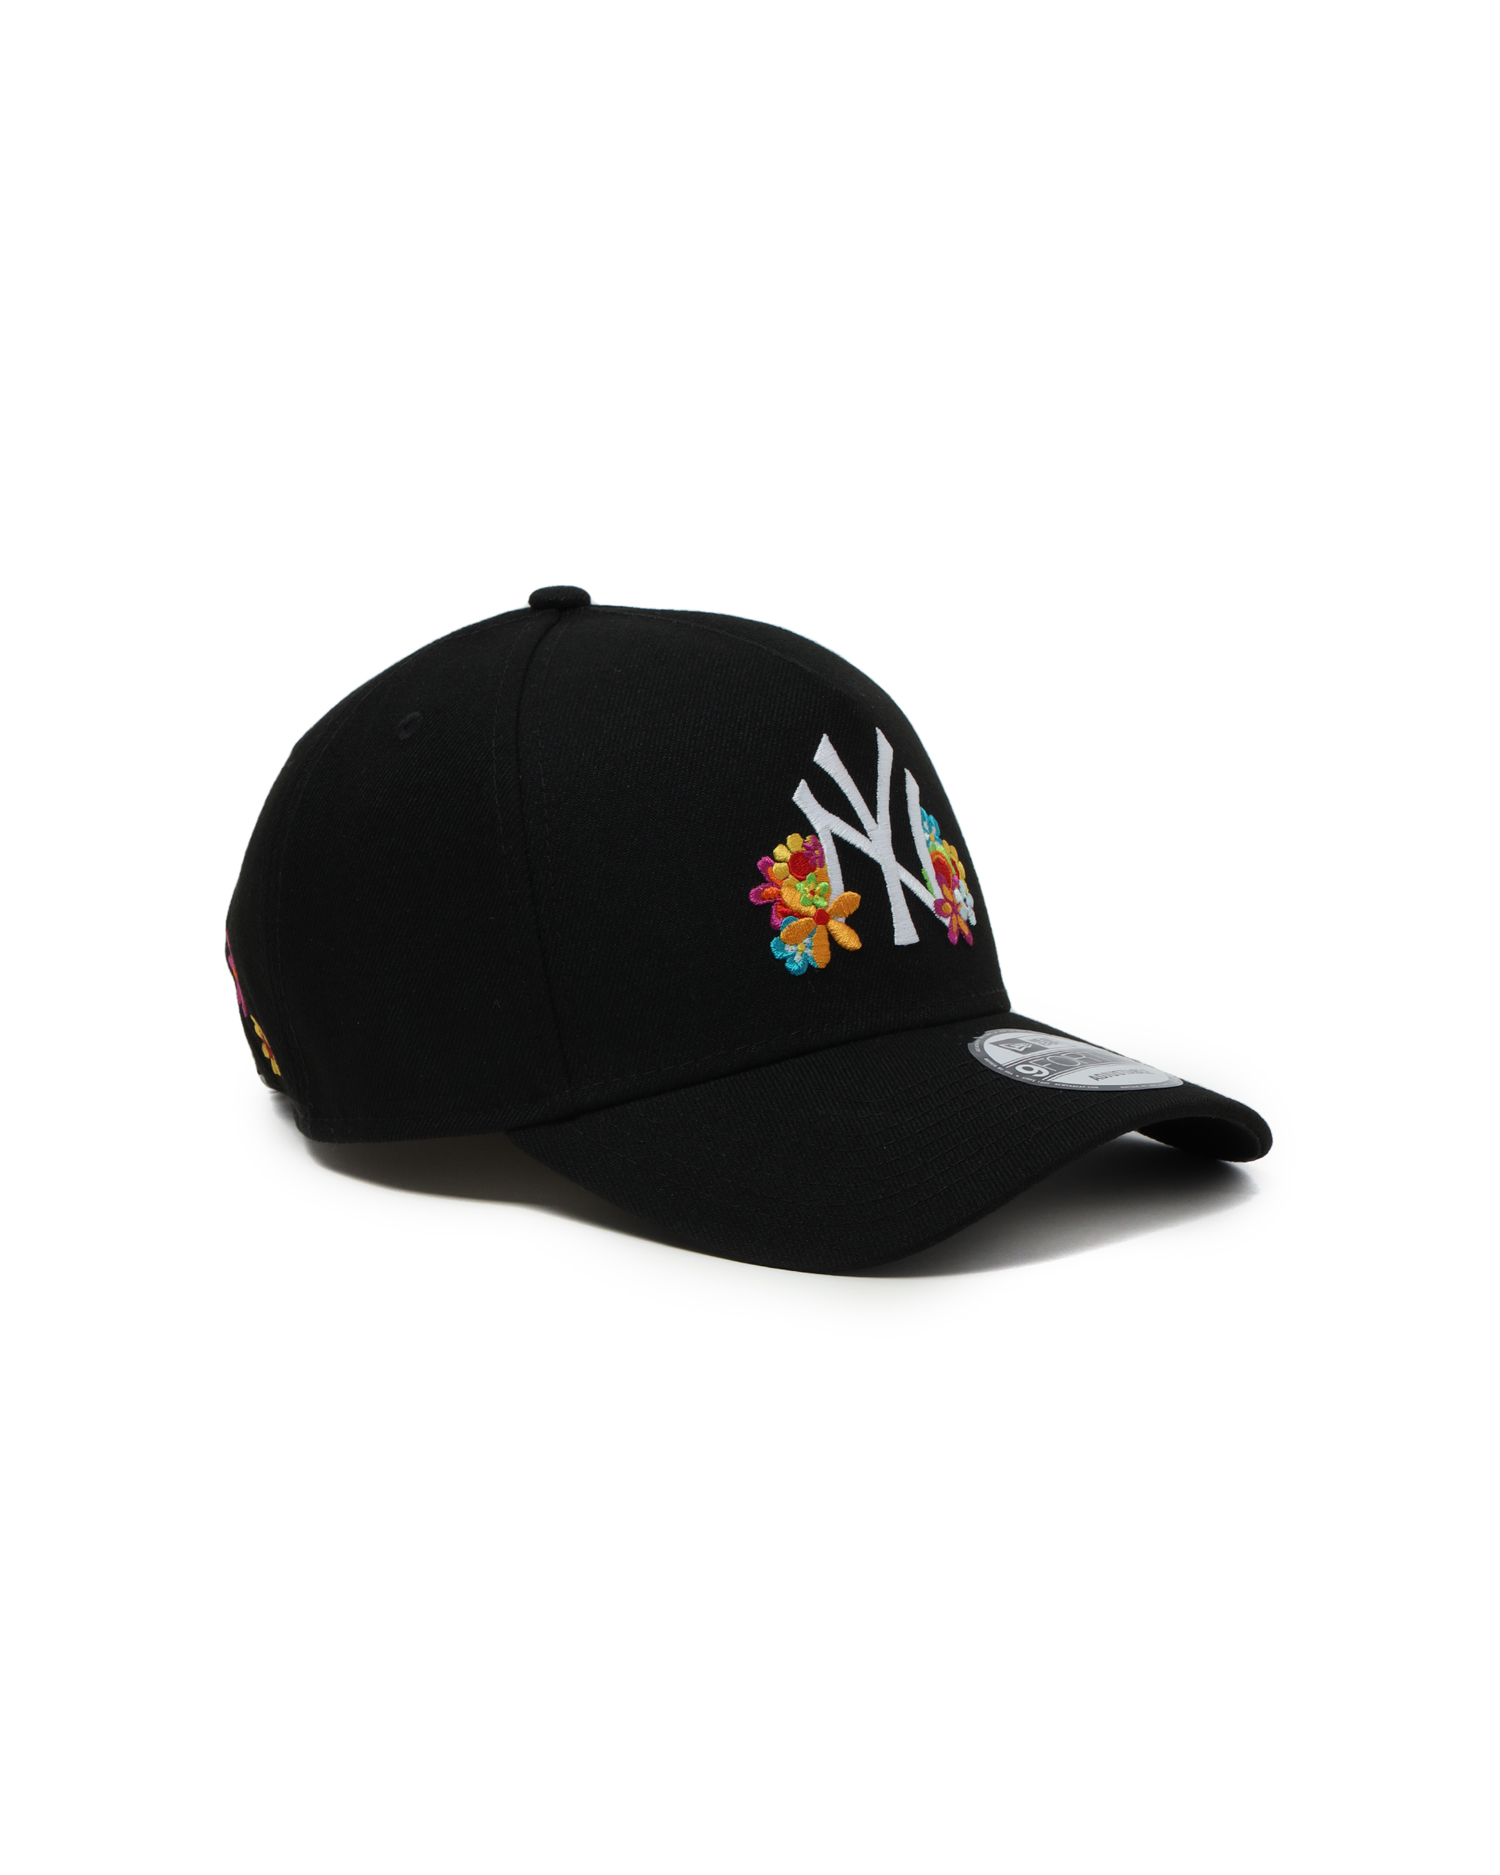 MLB LA floral snapback Mens Fashion Watches  Accessories Caps  Hats  on Carousell